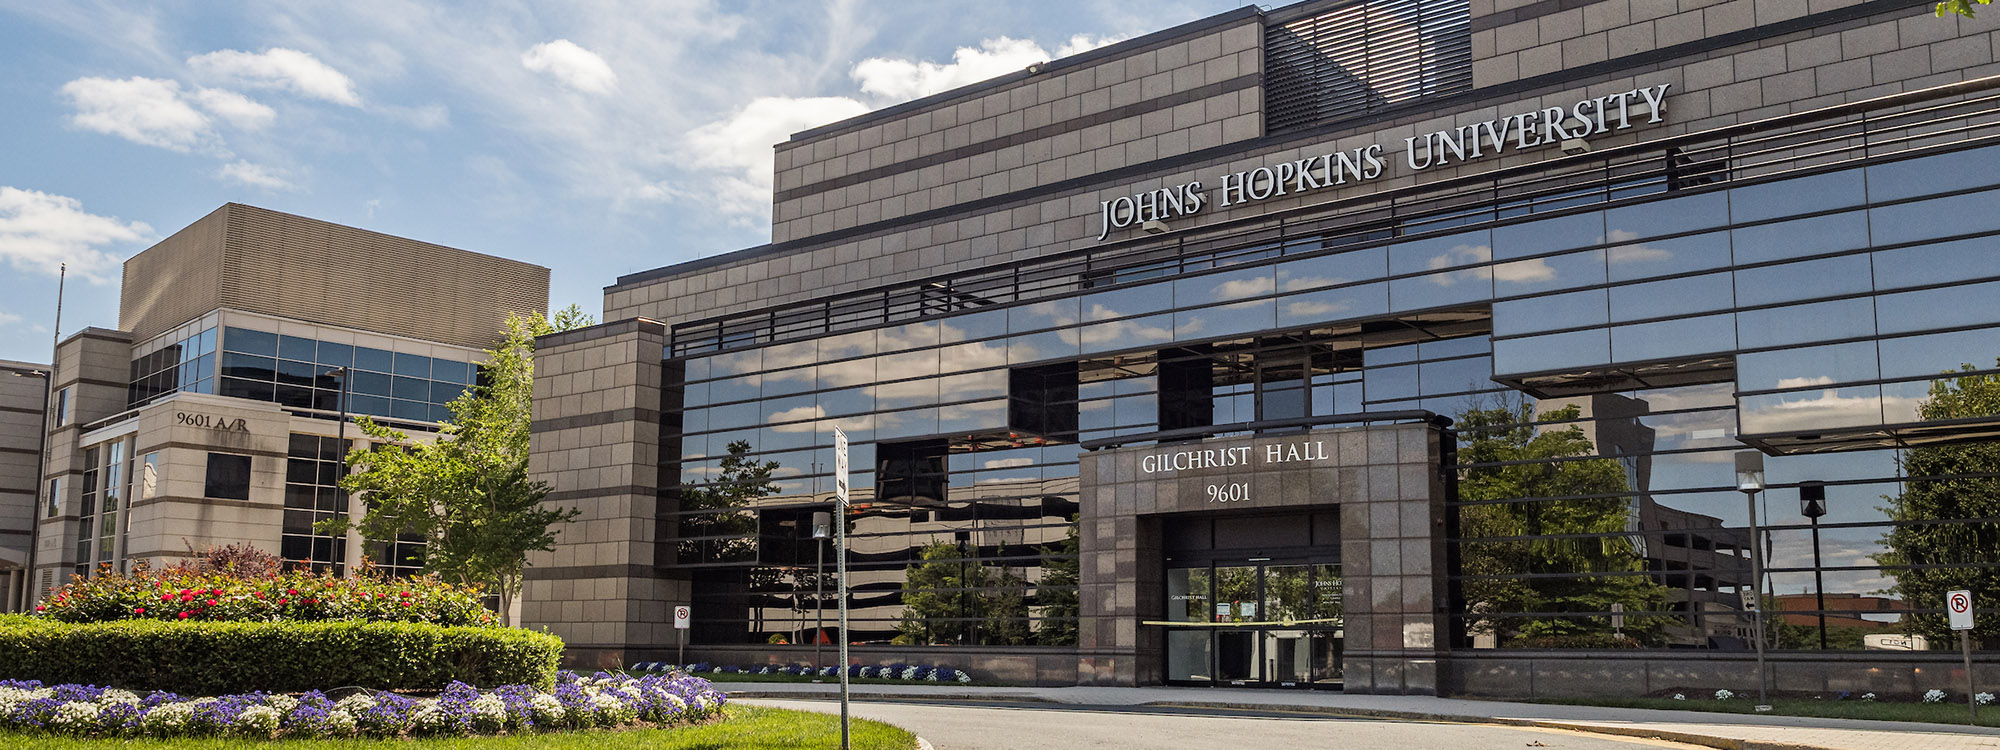 Johns Hopkins University Gilchrist Hall. Gray brick building with glass front